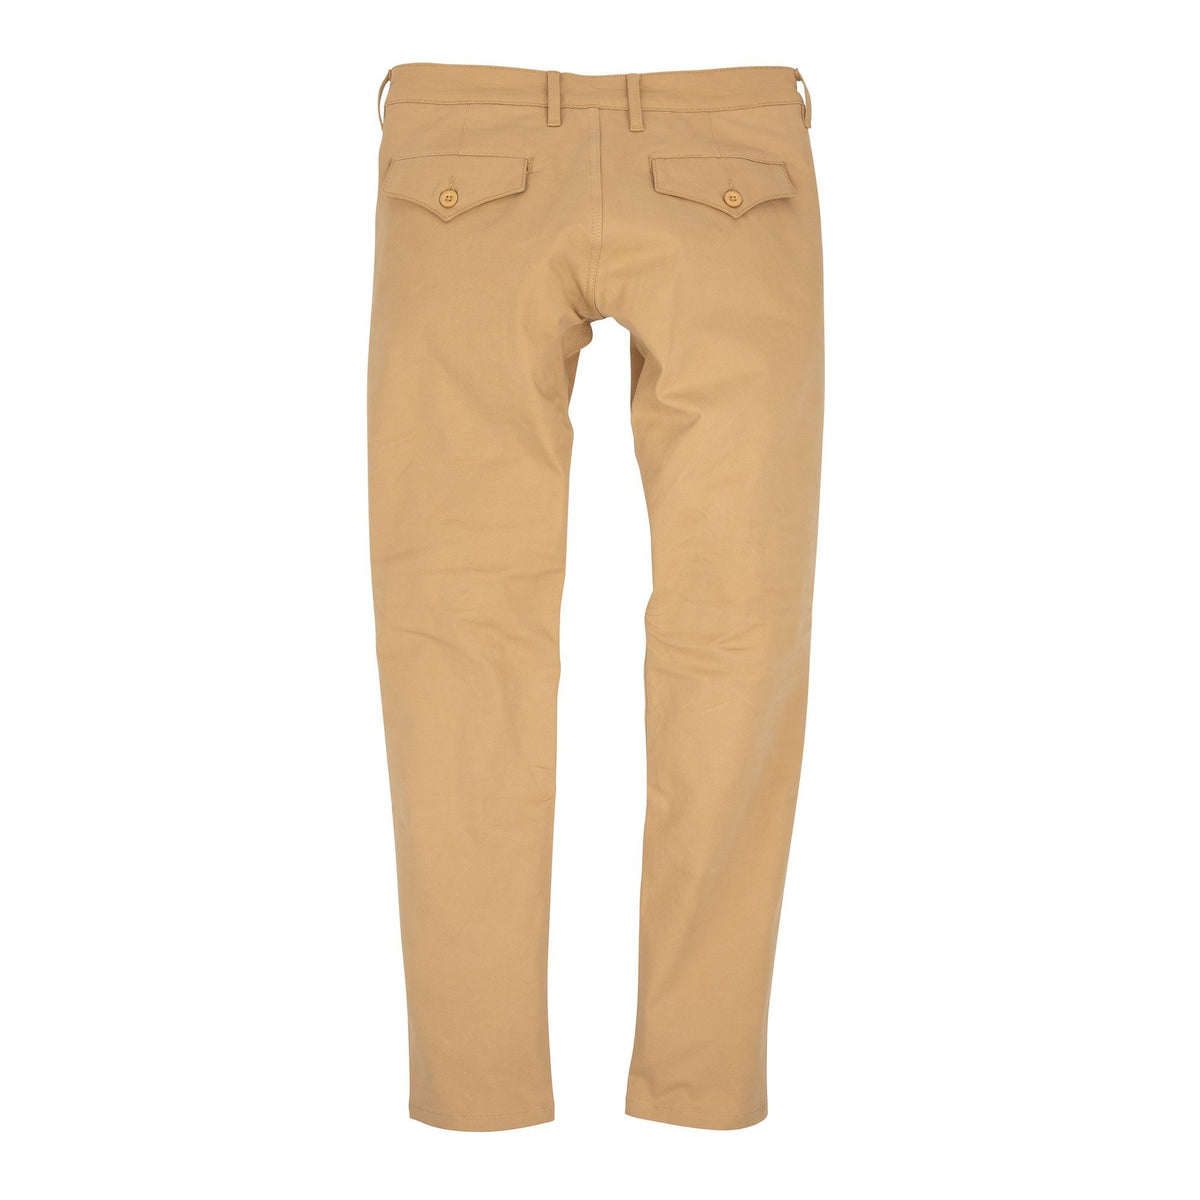 Motorcycle Pants in Fabric OJ LORD Light Brown Kaki For Sale Online   Outletmotoeu